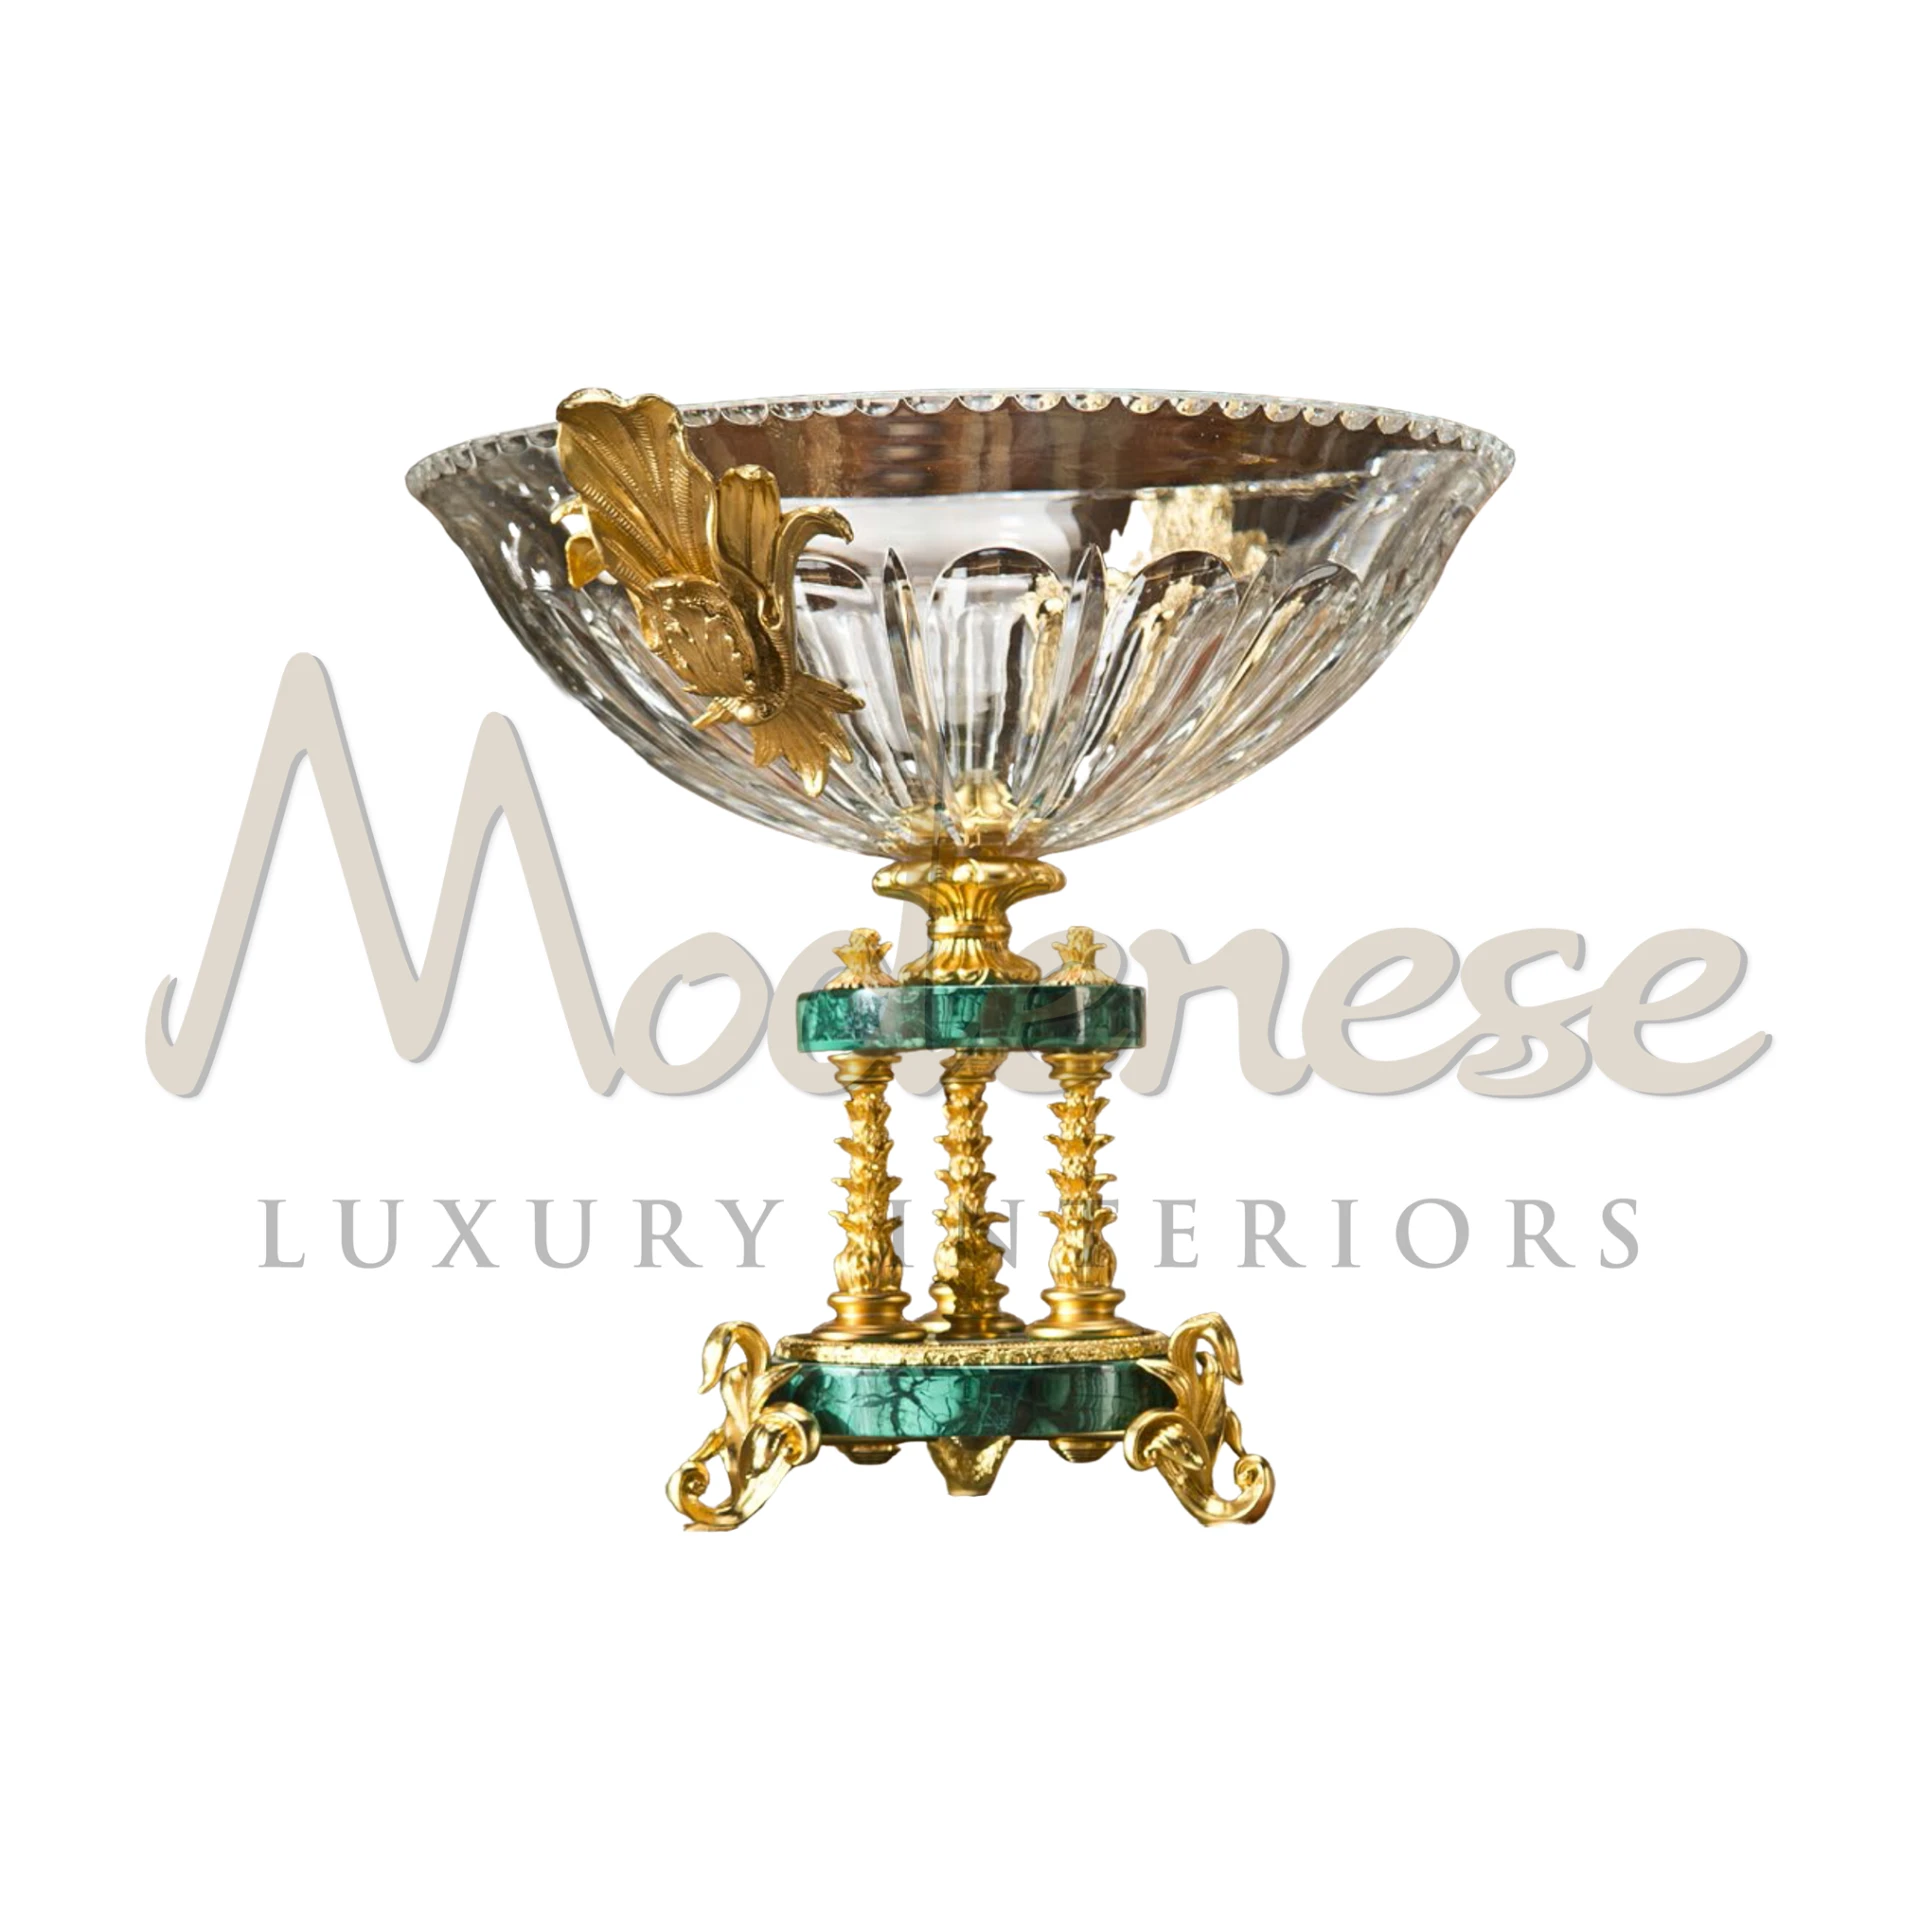 Luxury crystal vase adorned with gold accents, a masterpiece of interior design that embodies classic elegance.